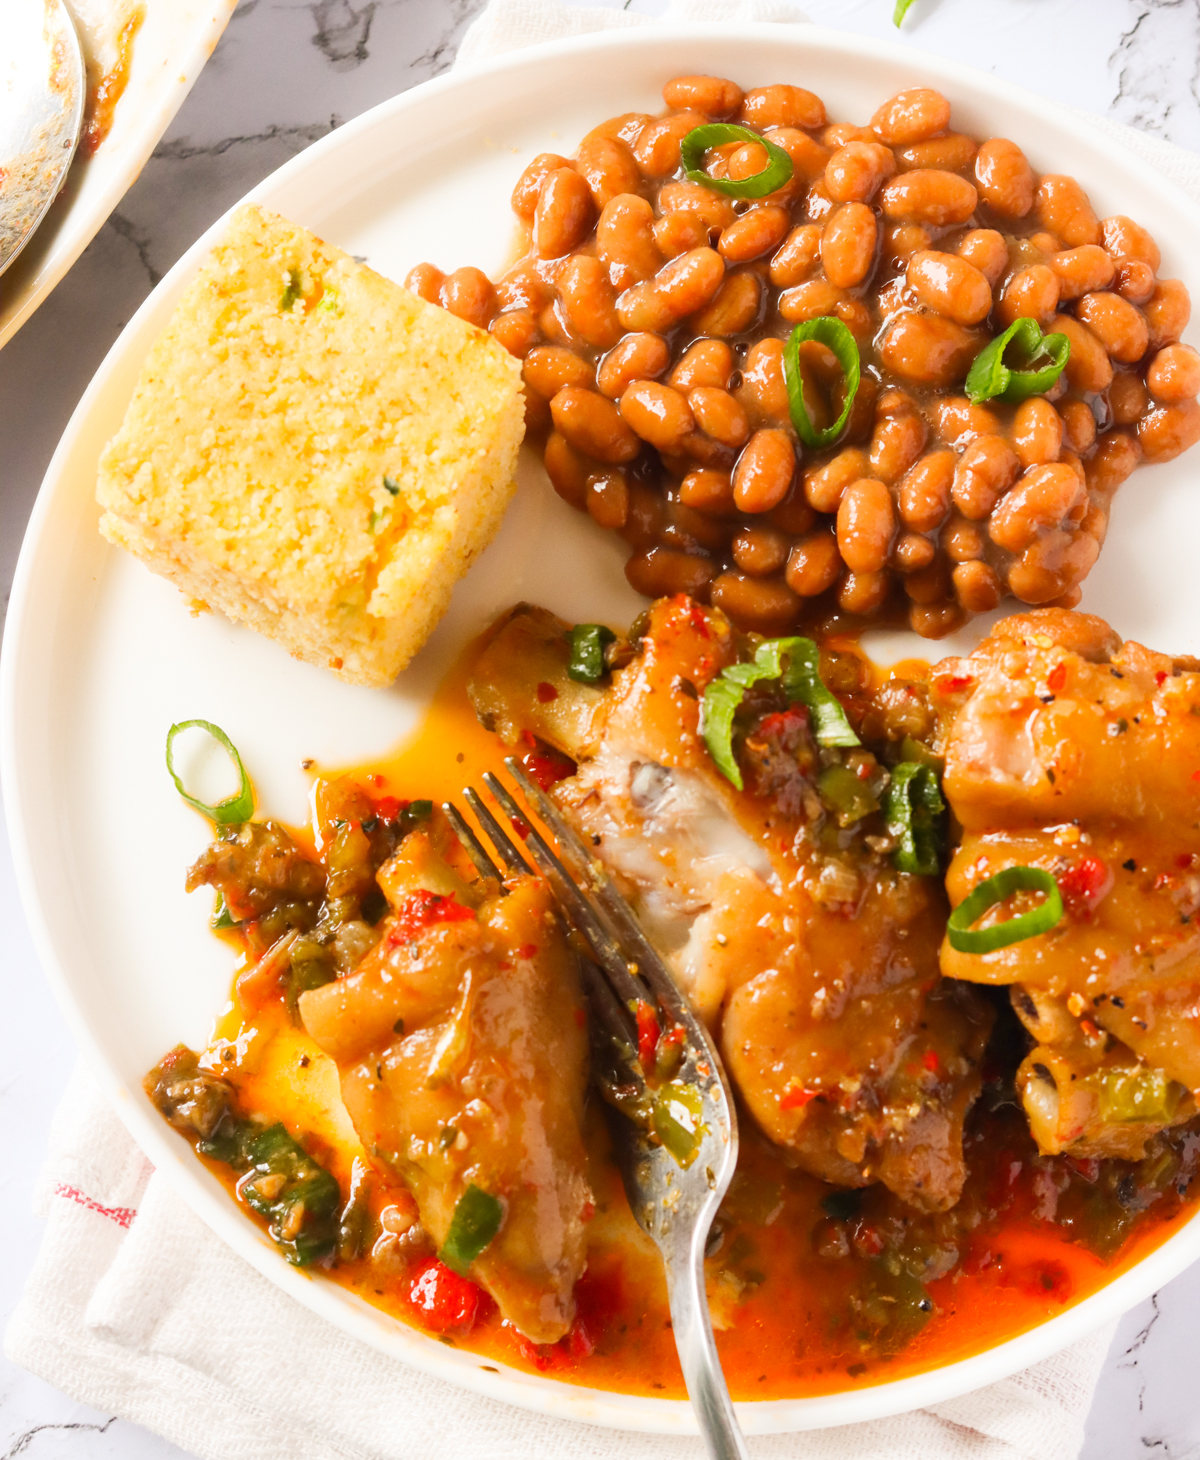 A plate of pig's feet, cornbread, and beans